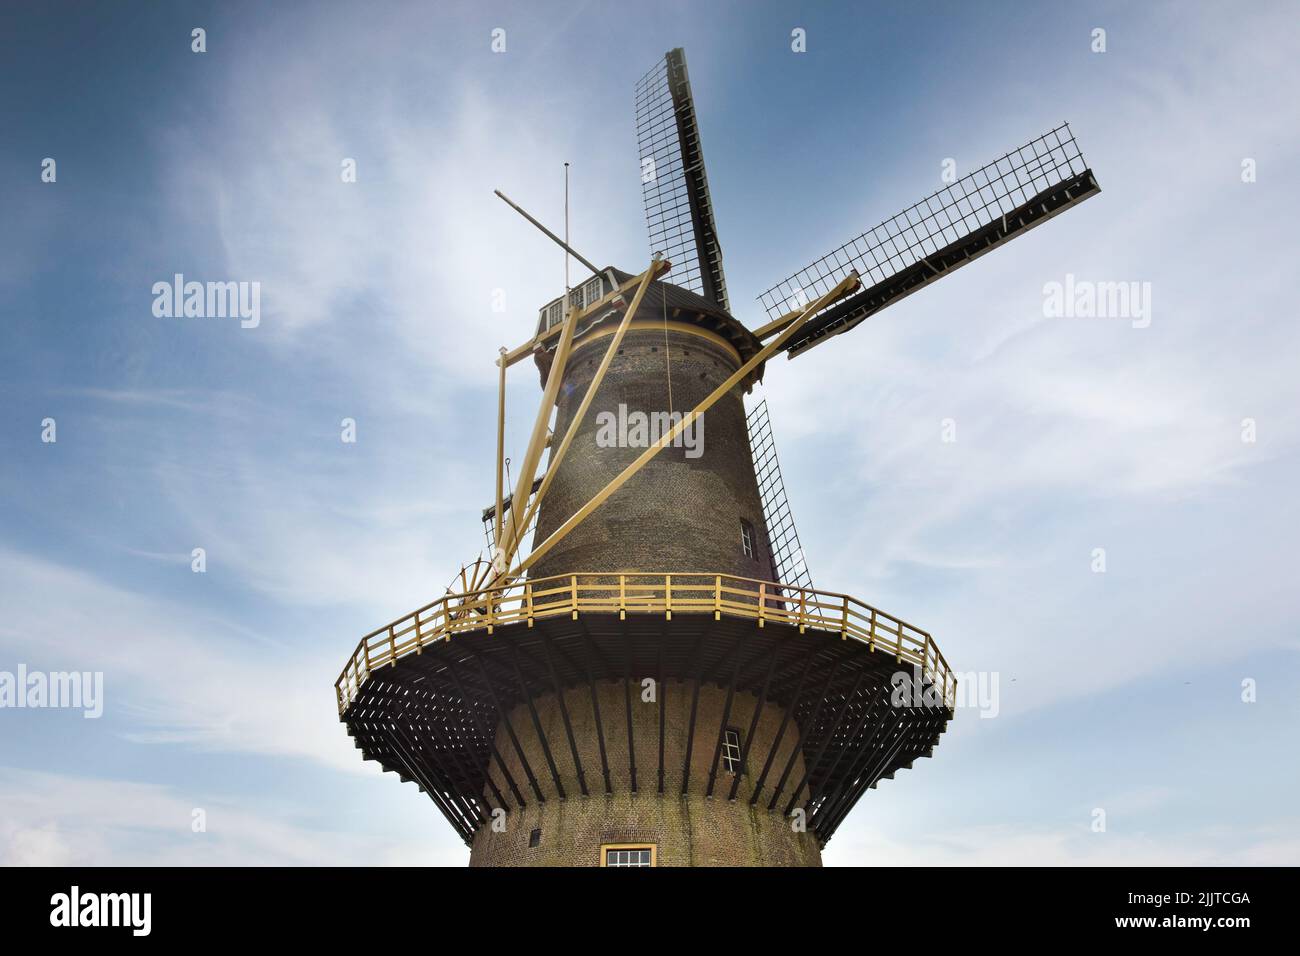 A low angle of a medieval windmill with sails on the sky background Stock Photo